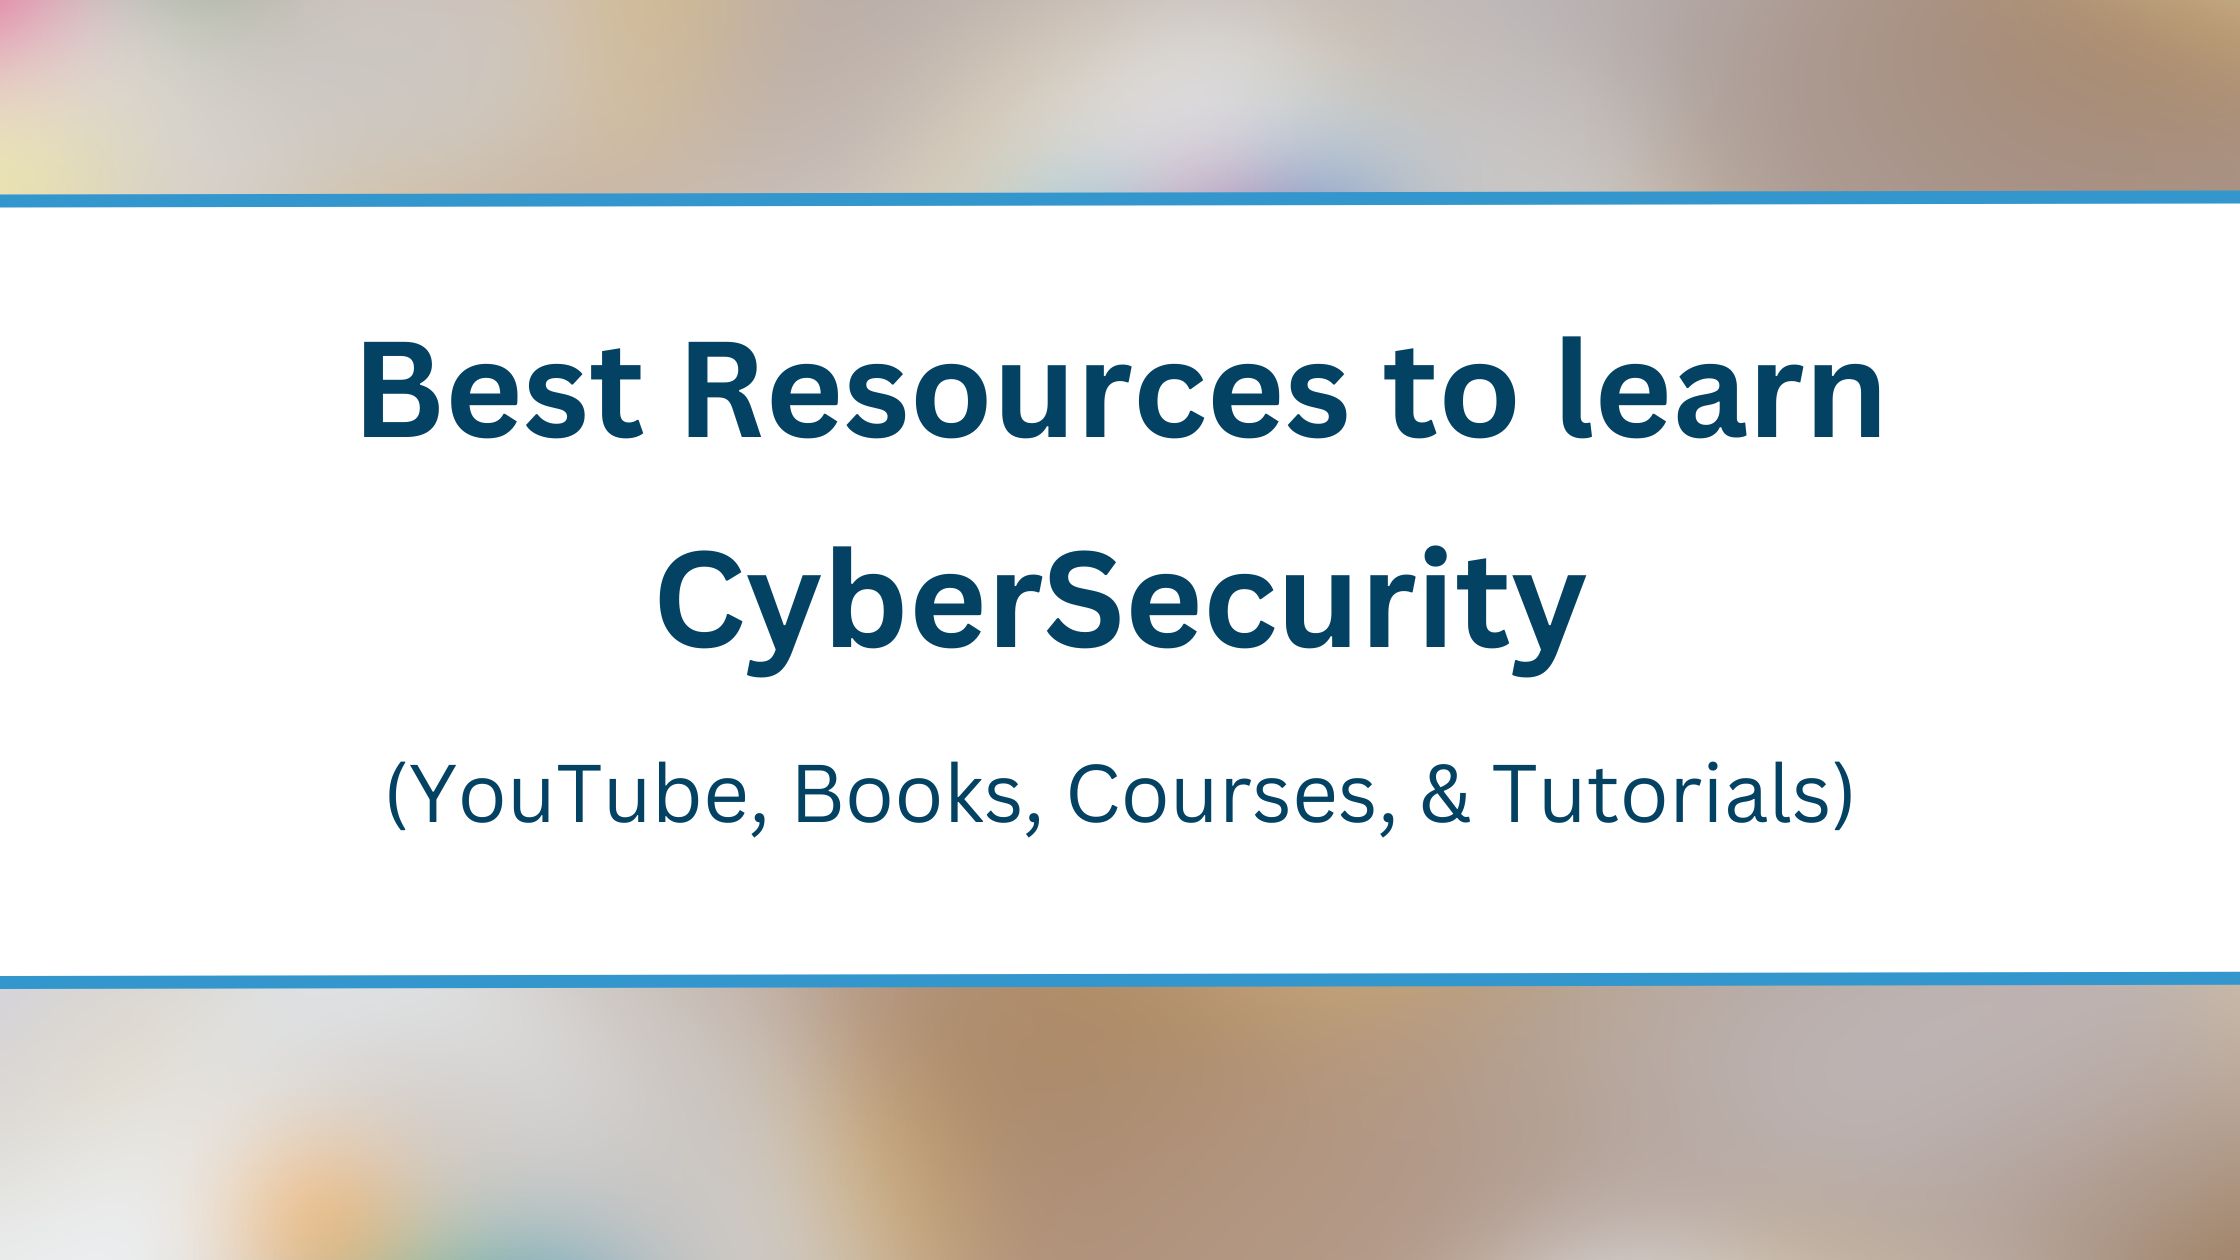 Cyber Security Resources